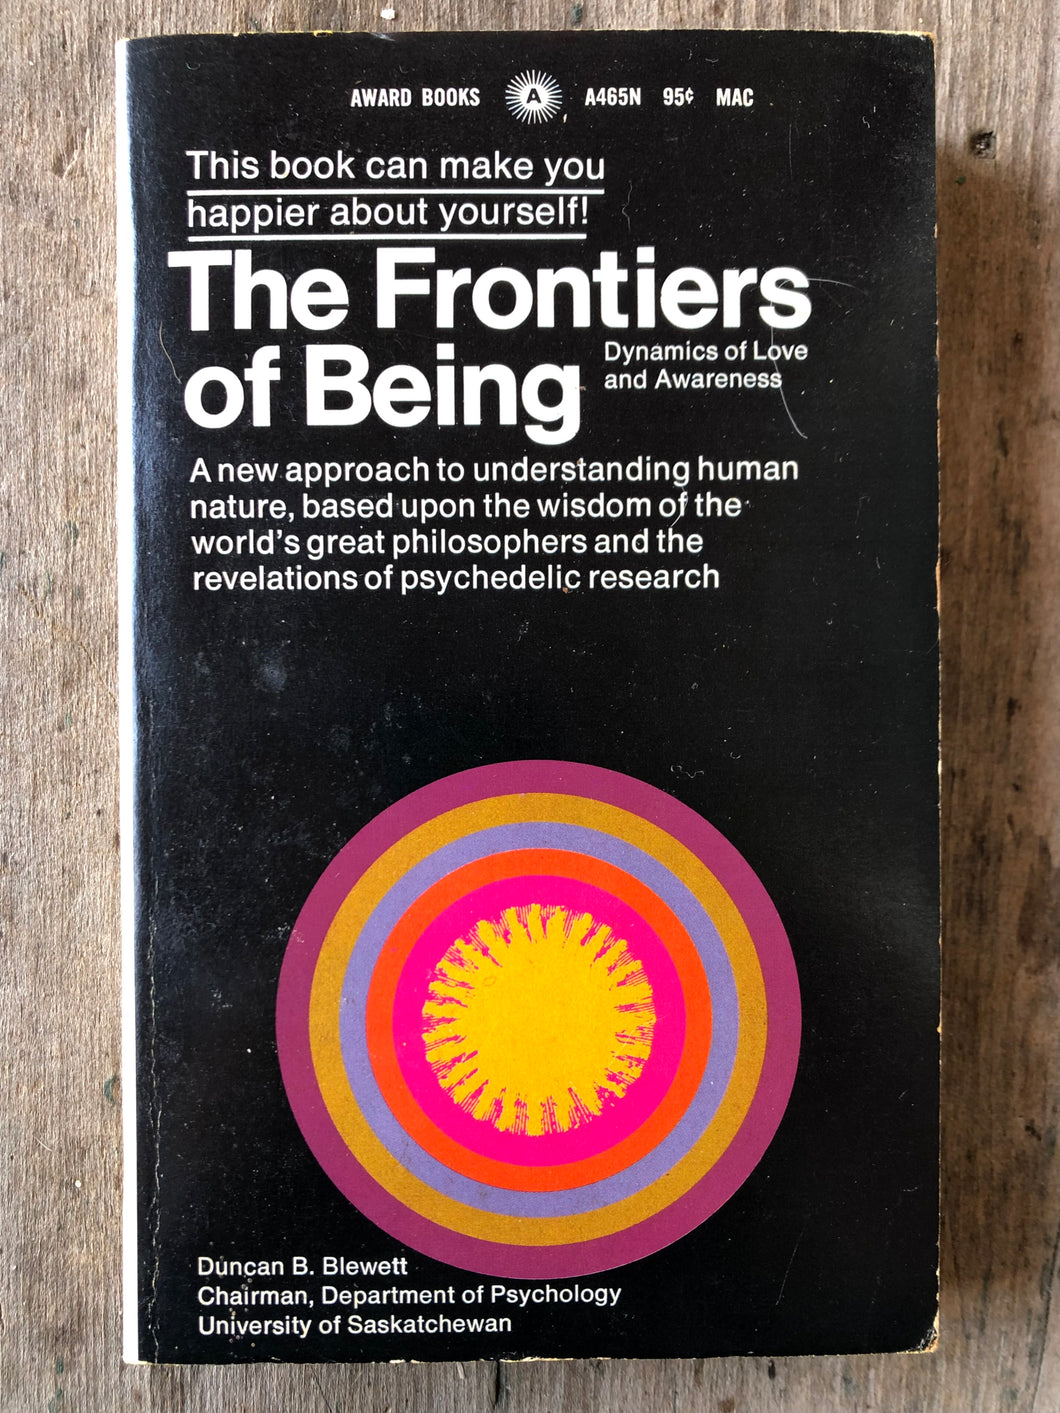 The Frontiers of Being. by Duncan B. Blewett